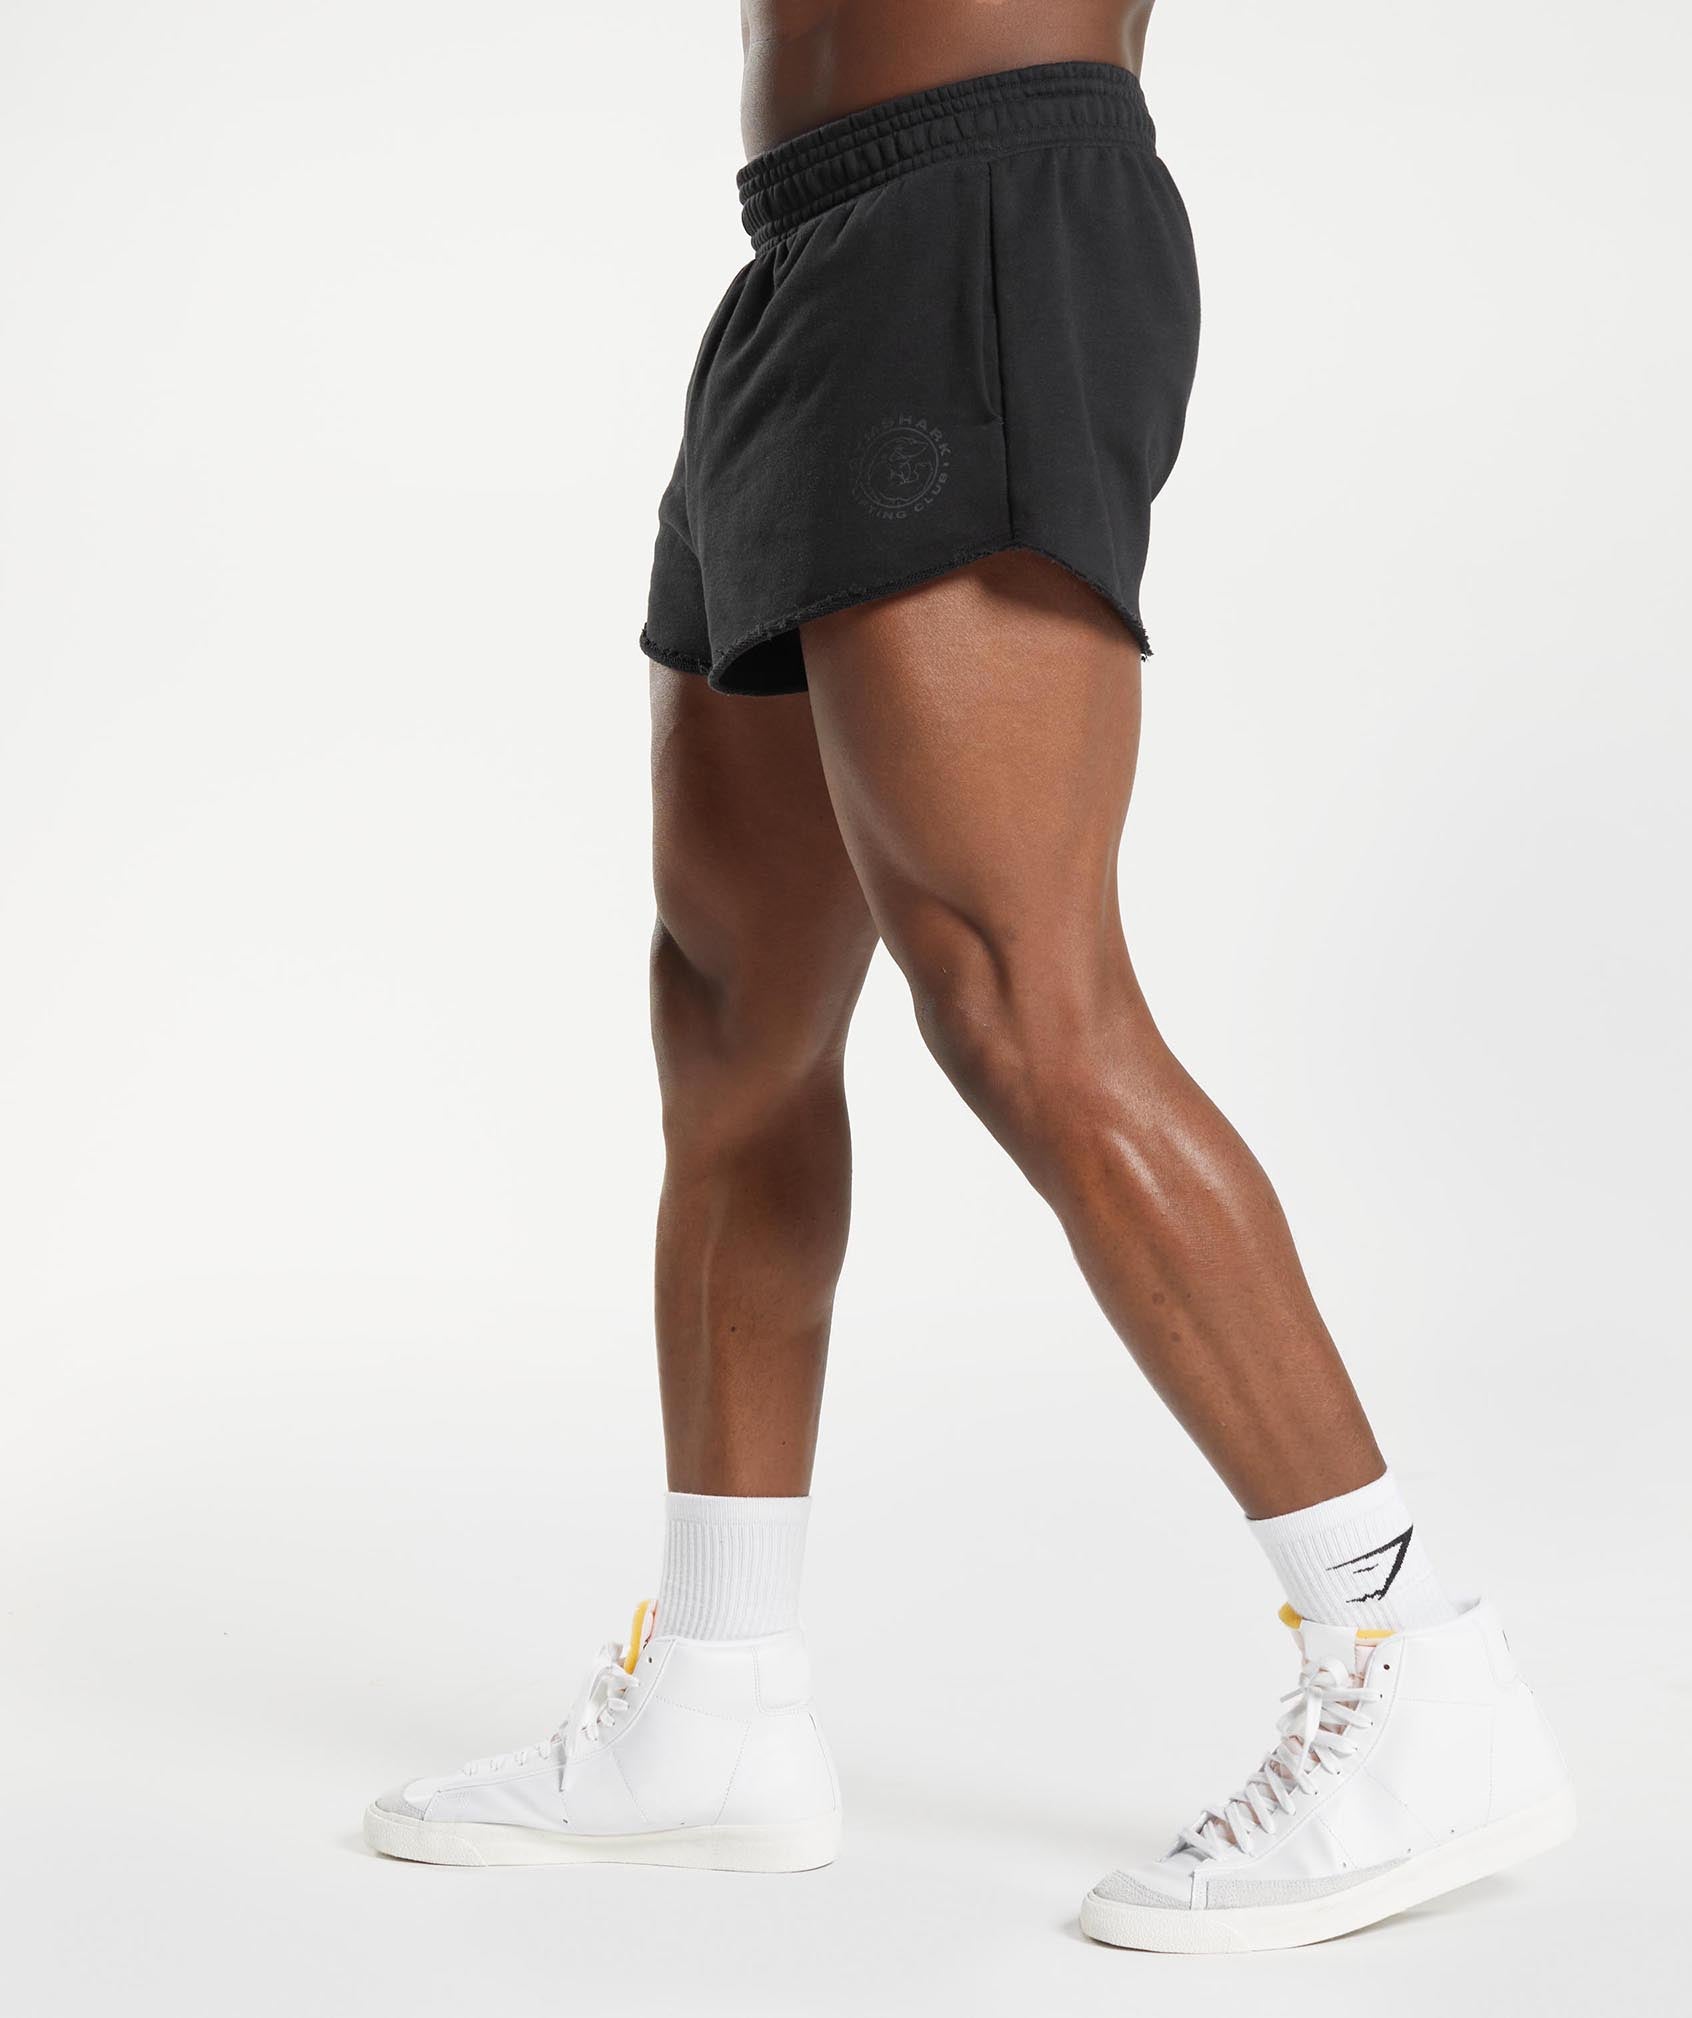 Legacy Shorts in Black - view 5